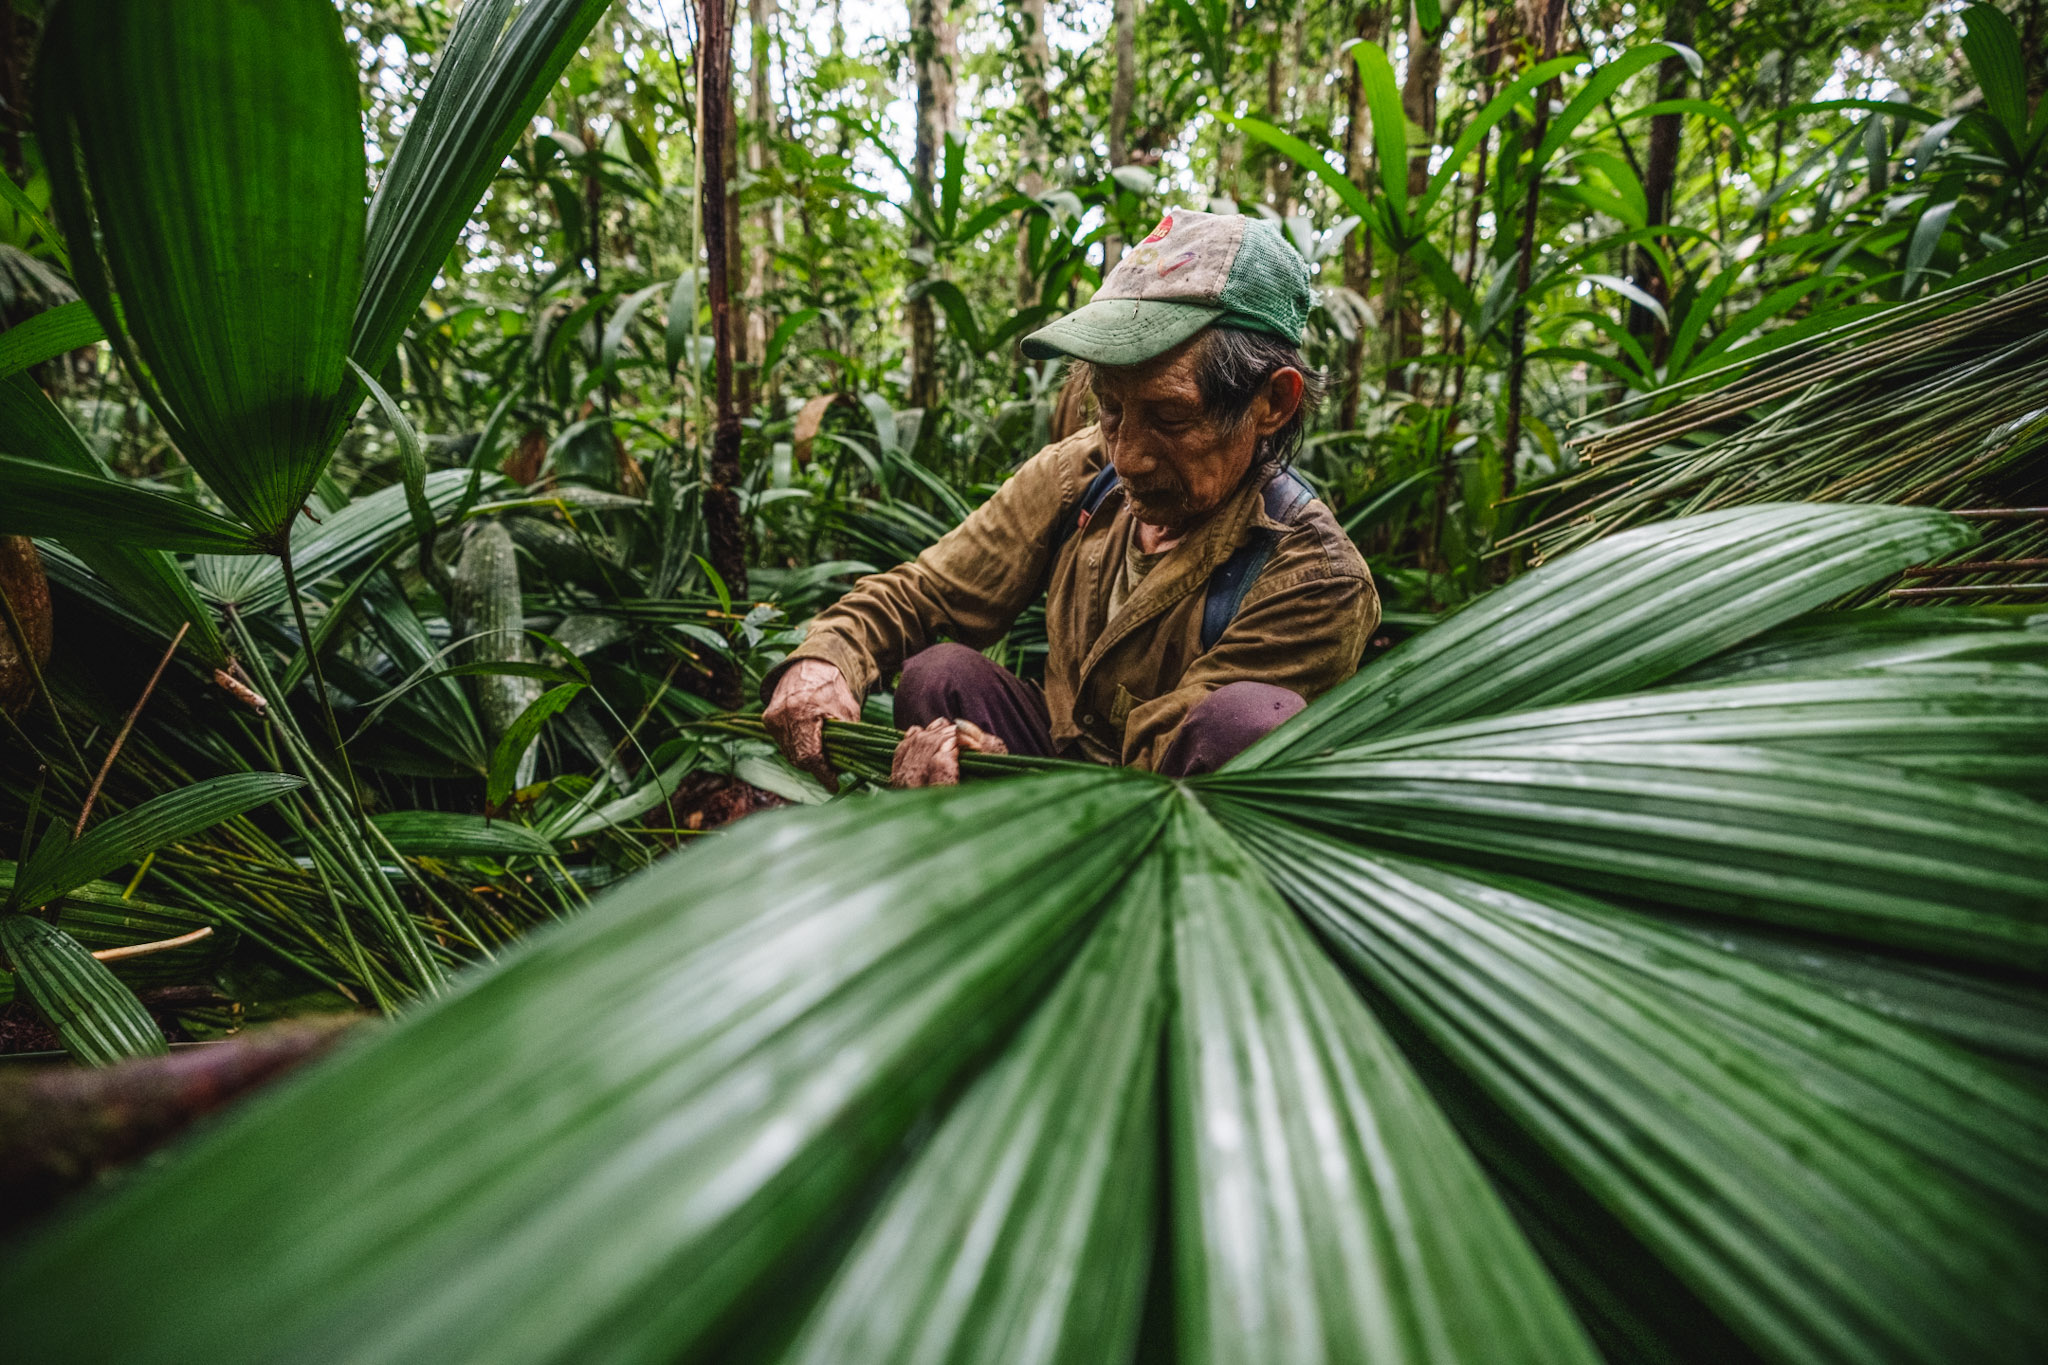 colombian indigenous cacique fisi andoke sorting palm leaves in the forest